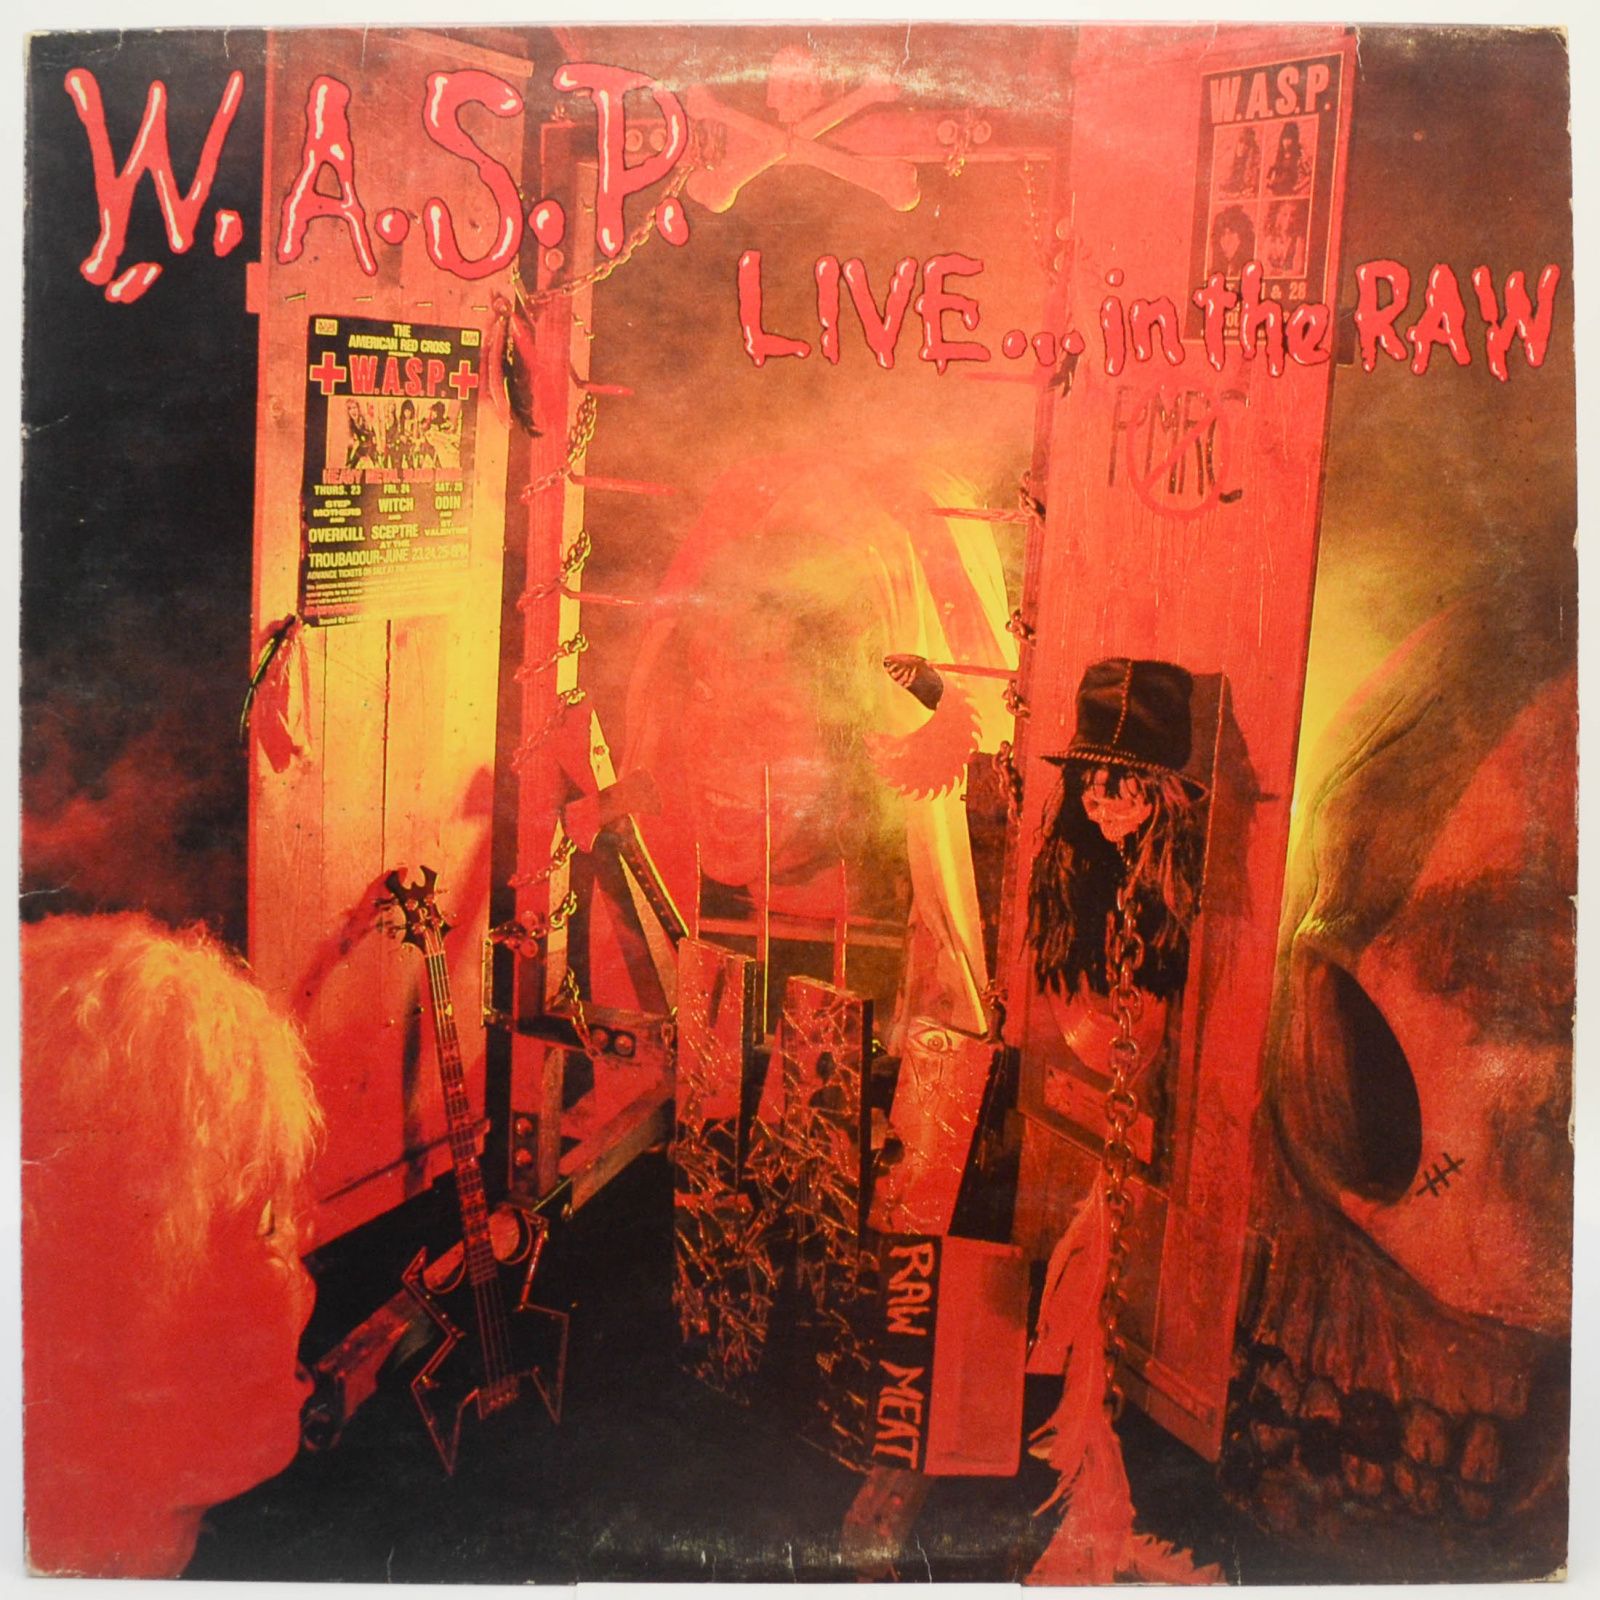 W.A.S.P. — Live... In The Raw, 1987